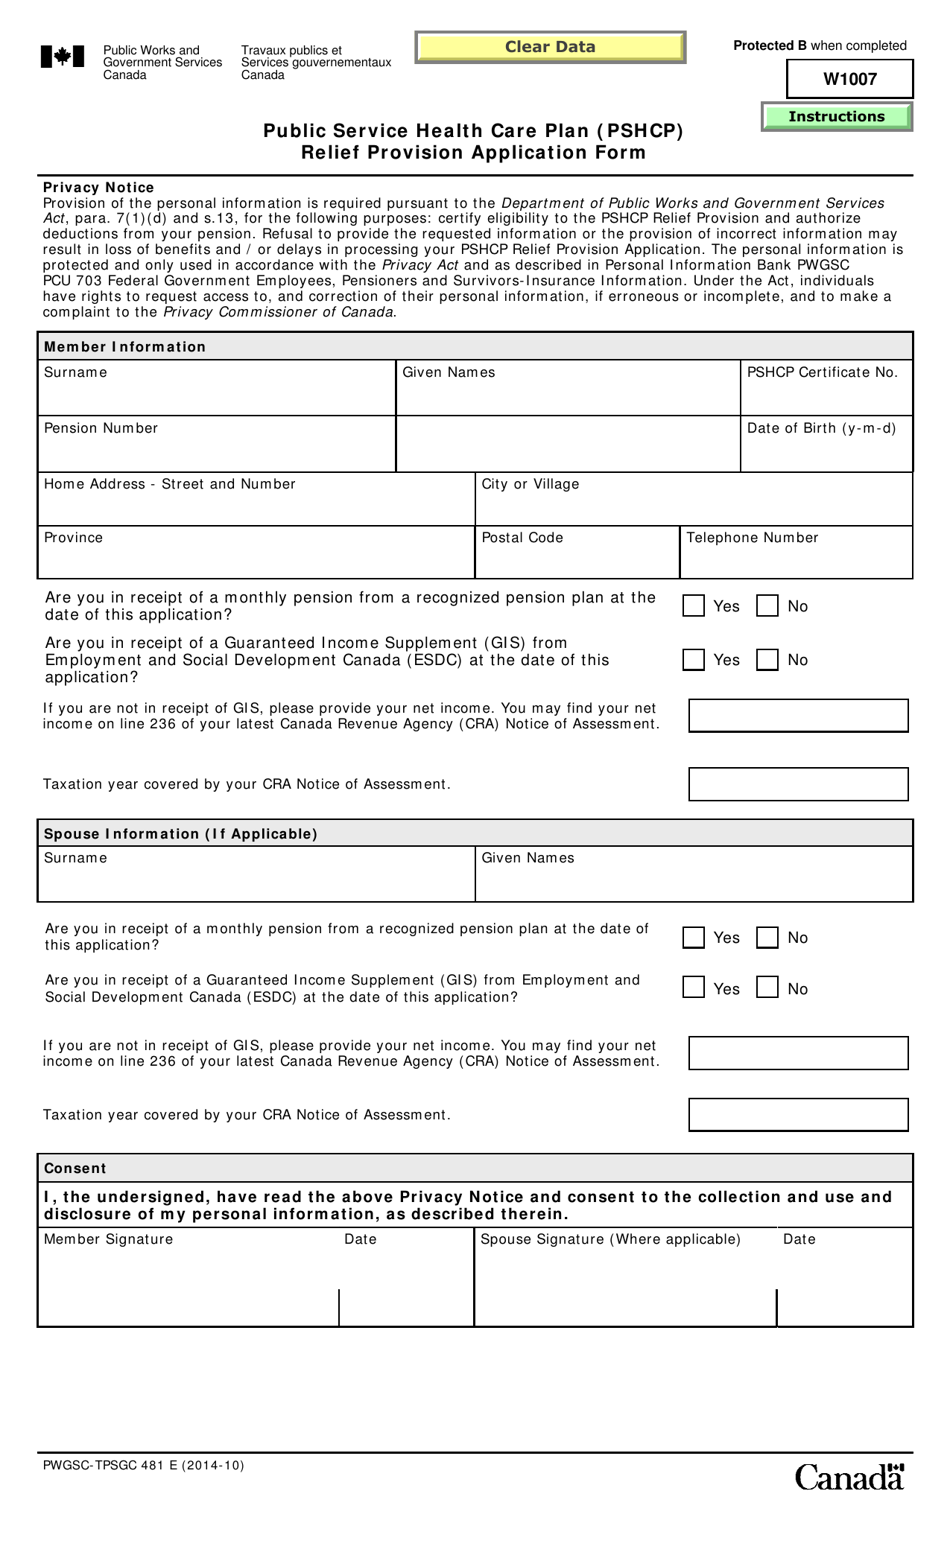 Form PWGSC-TPSGC481 Public Service Health Care Plan (Pshcp) Relief Provision Application Form - Canada, Page 1